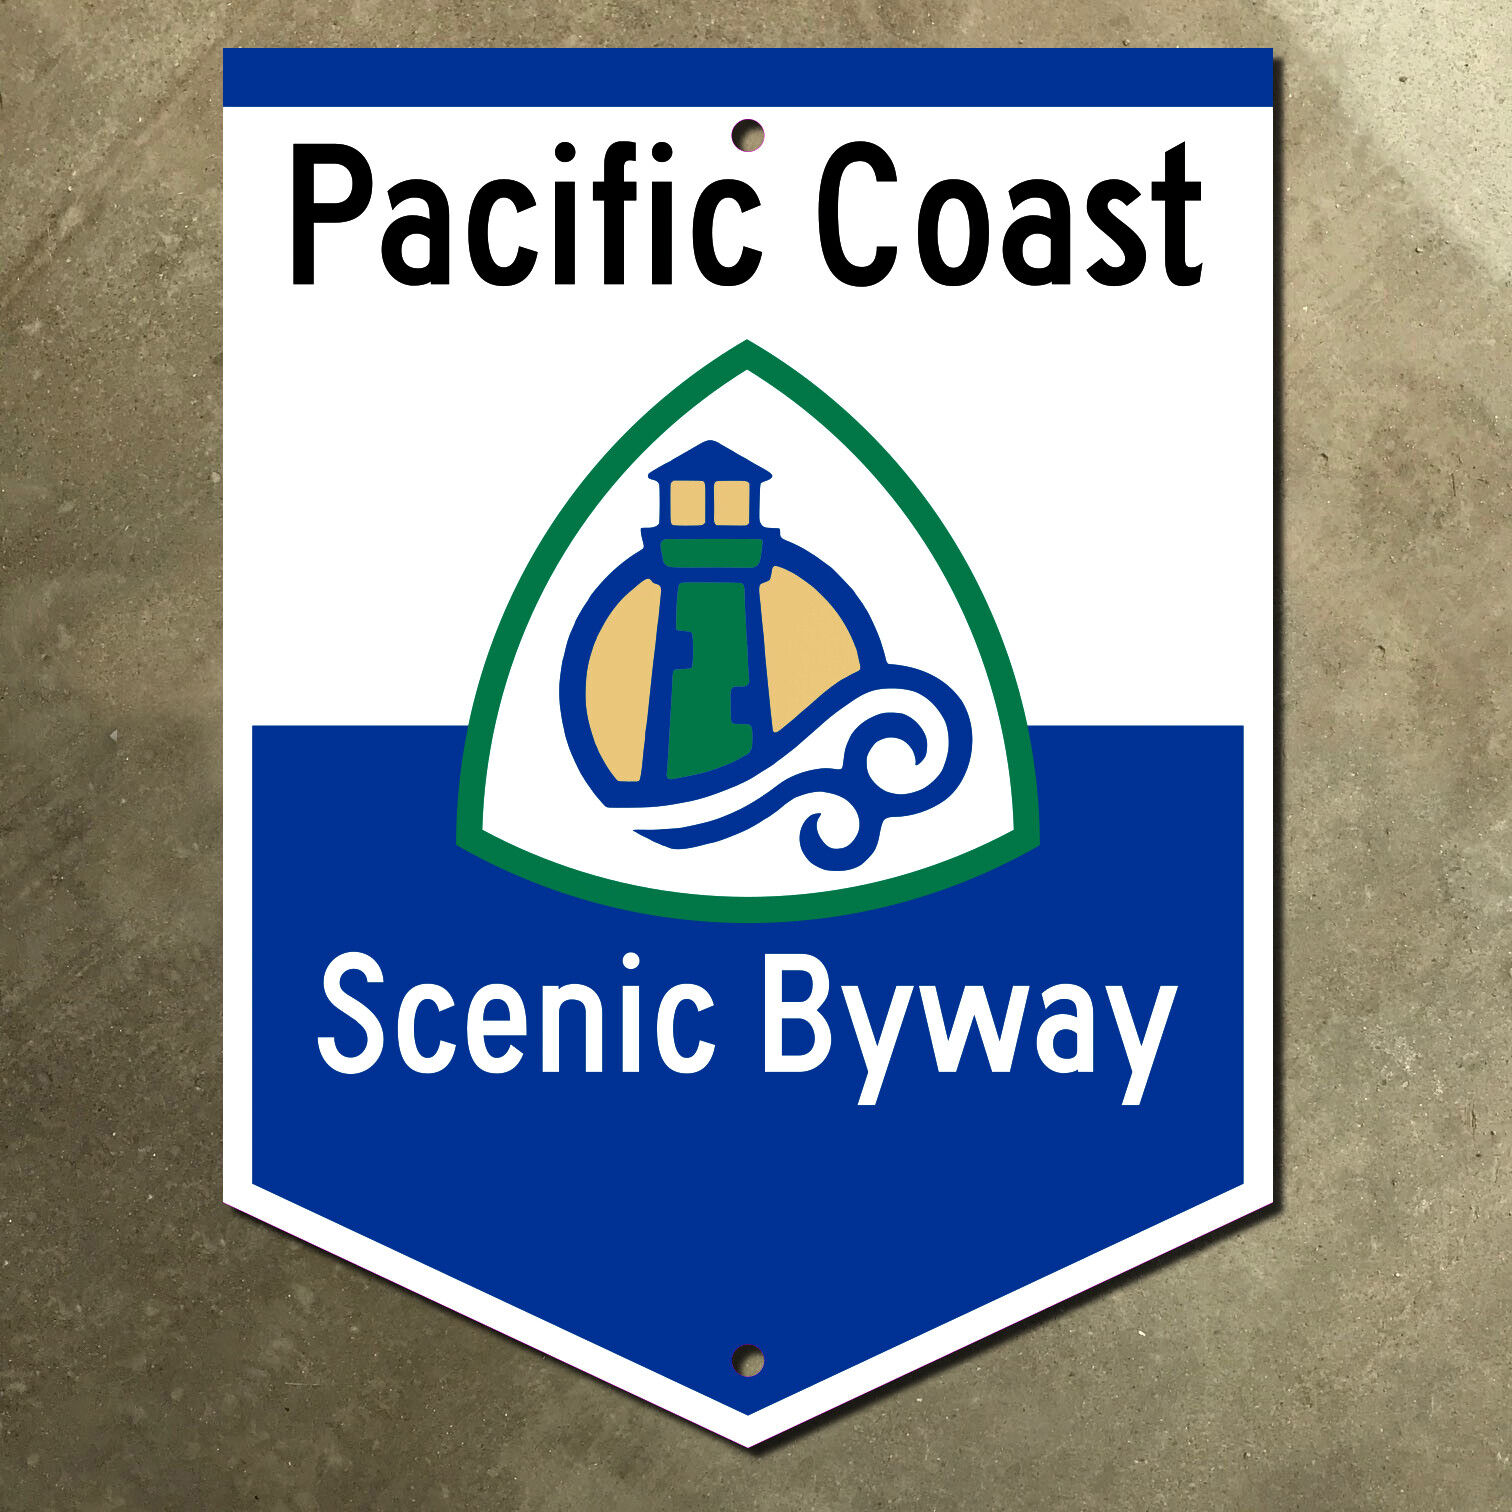 Pacific Coast Scenic Byway Oregon US route 101 highway marker road sign 15x20